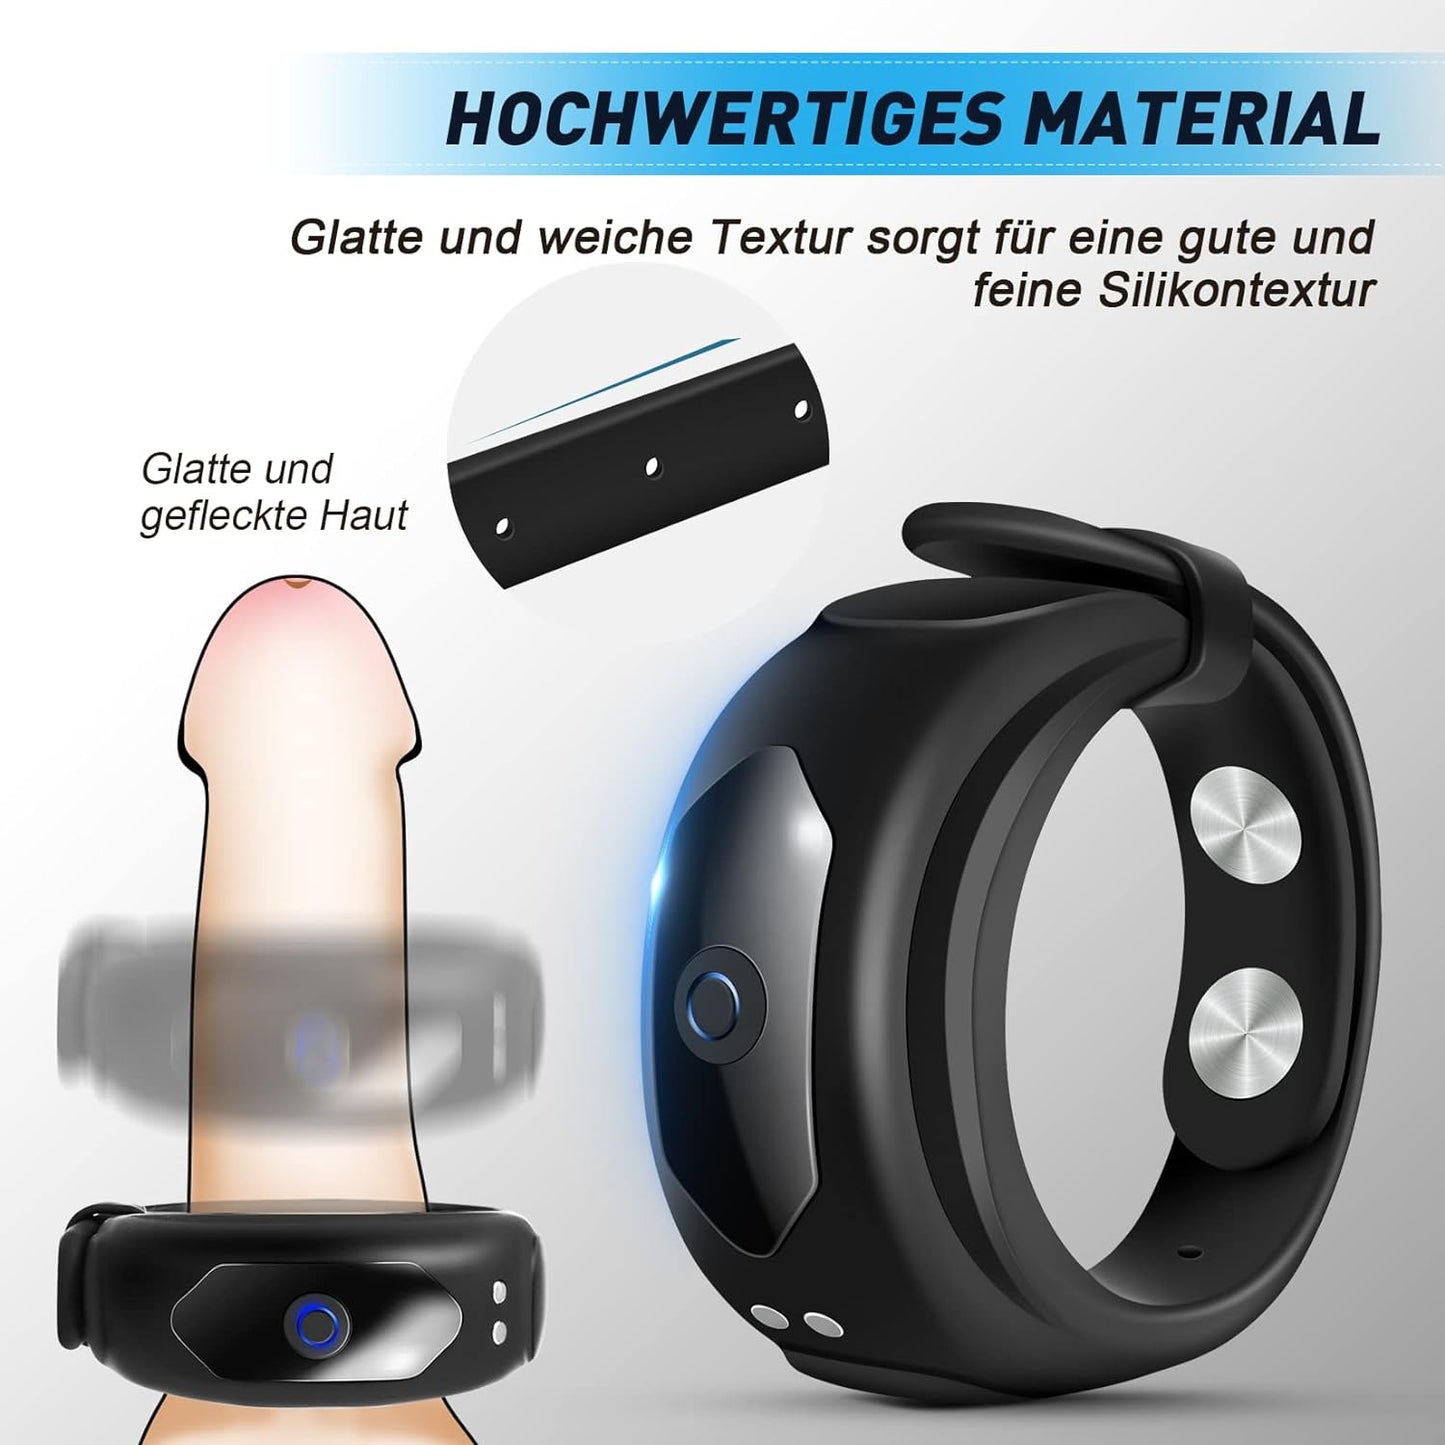 4 sizes penis rings cock ring vibrator with 10 powerful vibration modes 